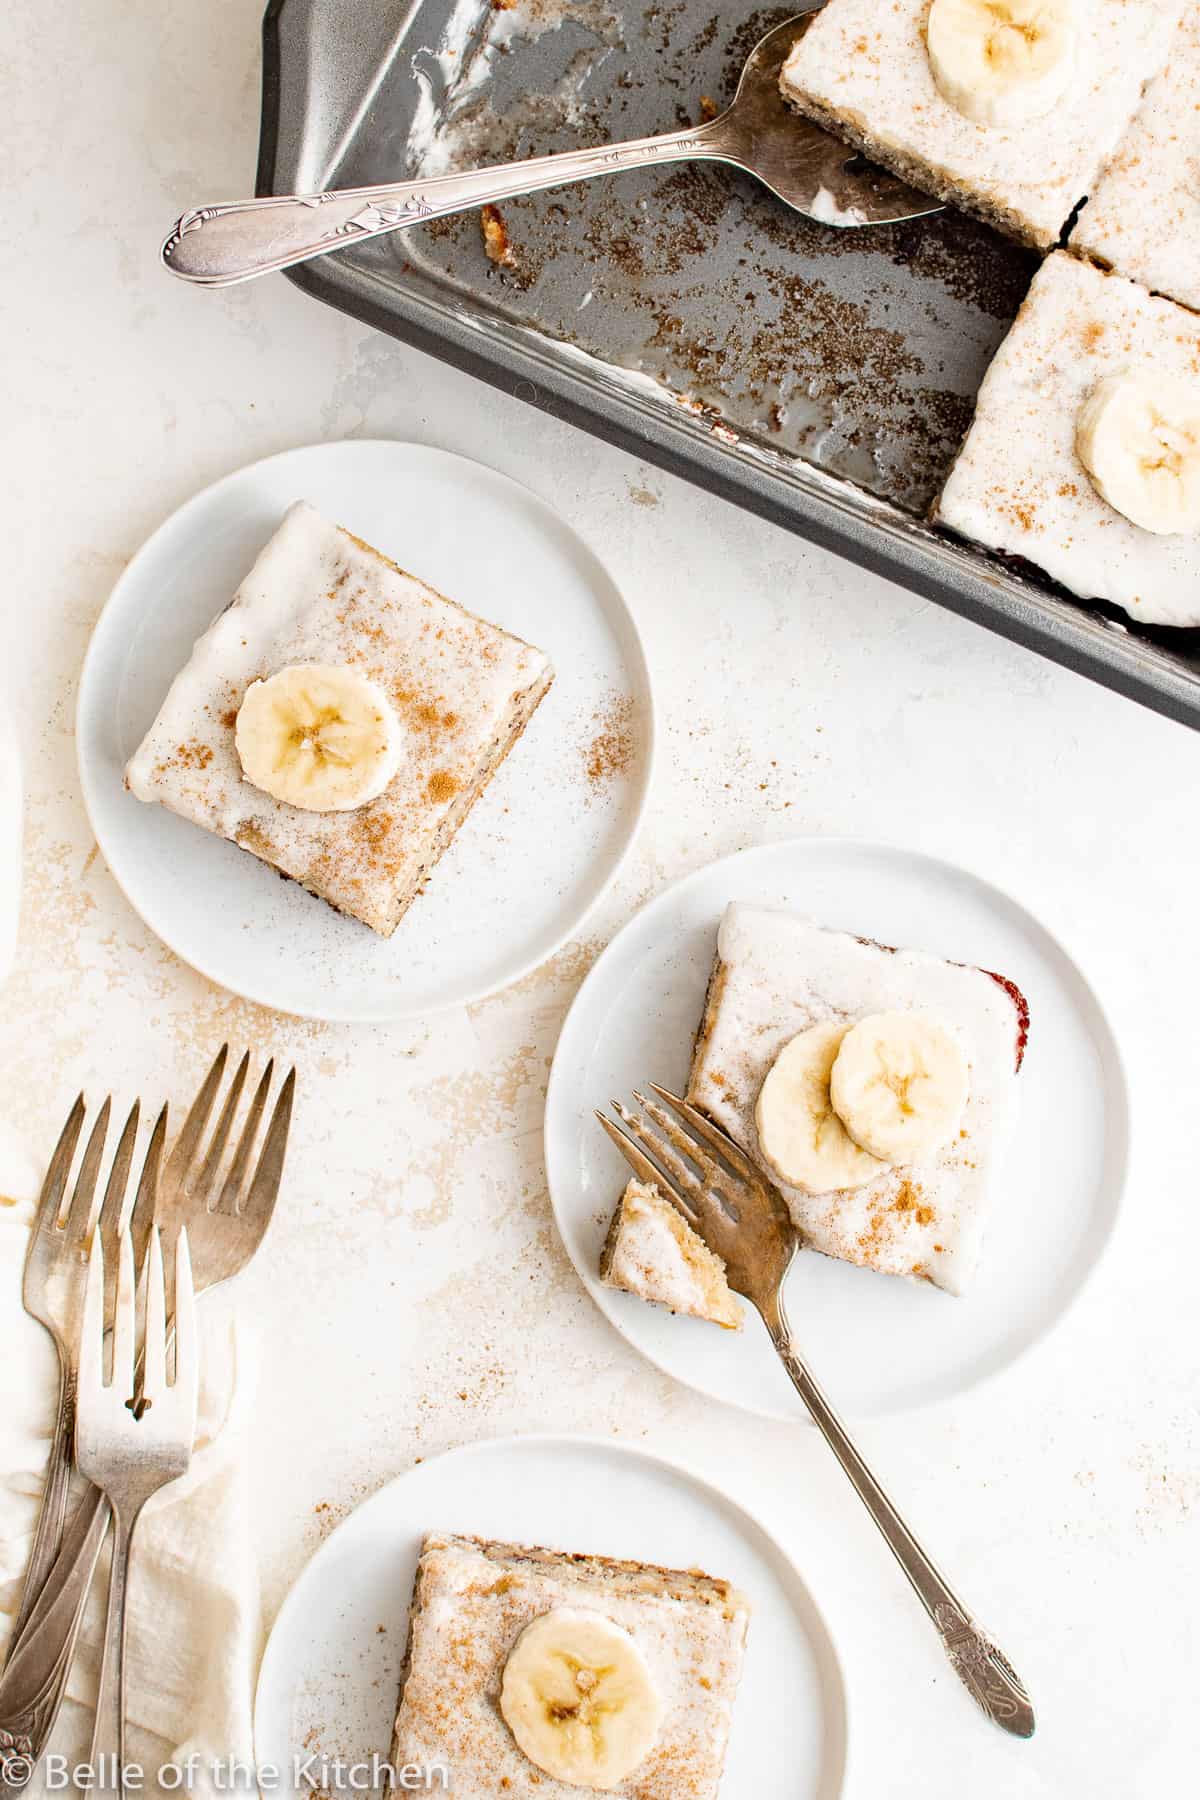 slices of cake topped with sliced bananas on white plates.